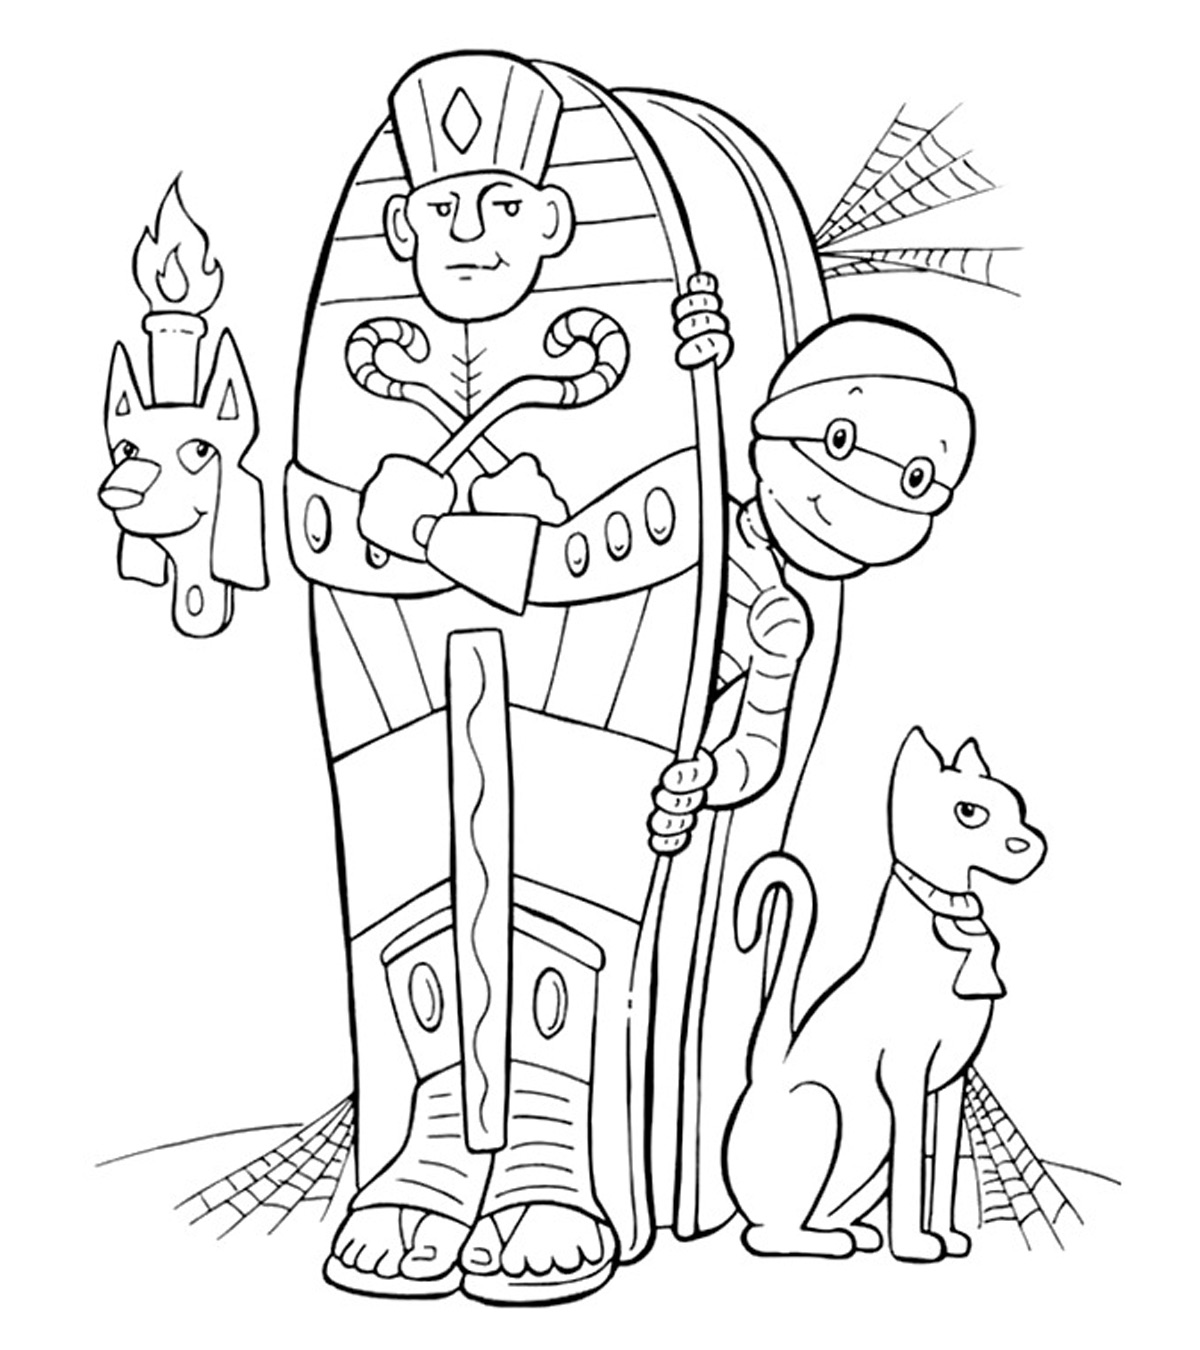 Top 10 Ancient Egypt Coloring Pages For Toddlers